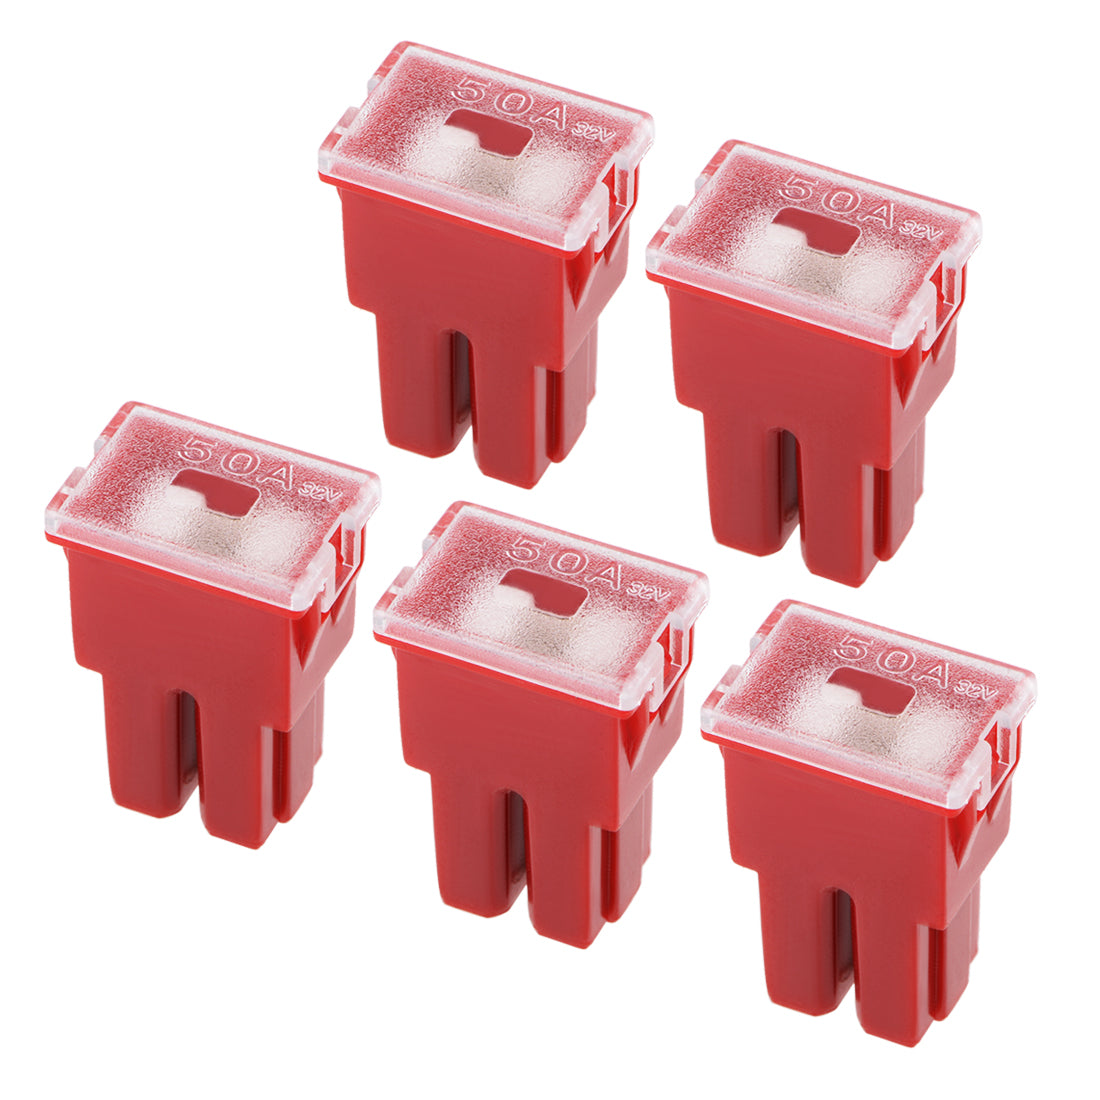 uxcell Uxcell Automotive Cartridge Fuse 32V 50A Female Terminal Cars Truck  5pcs